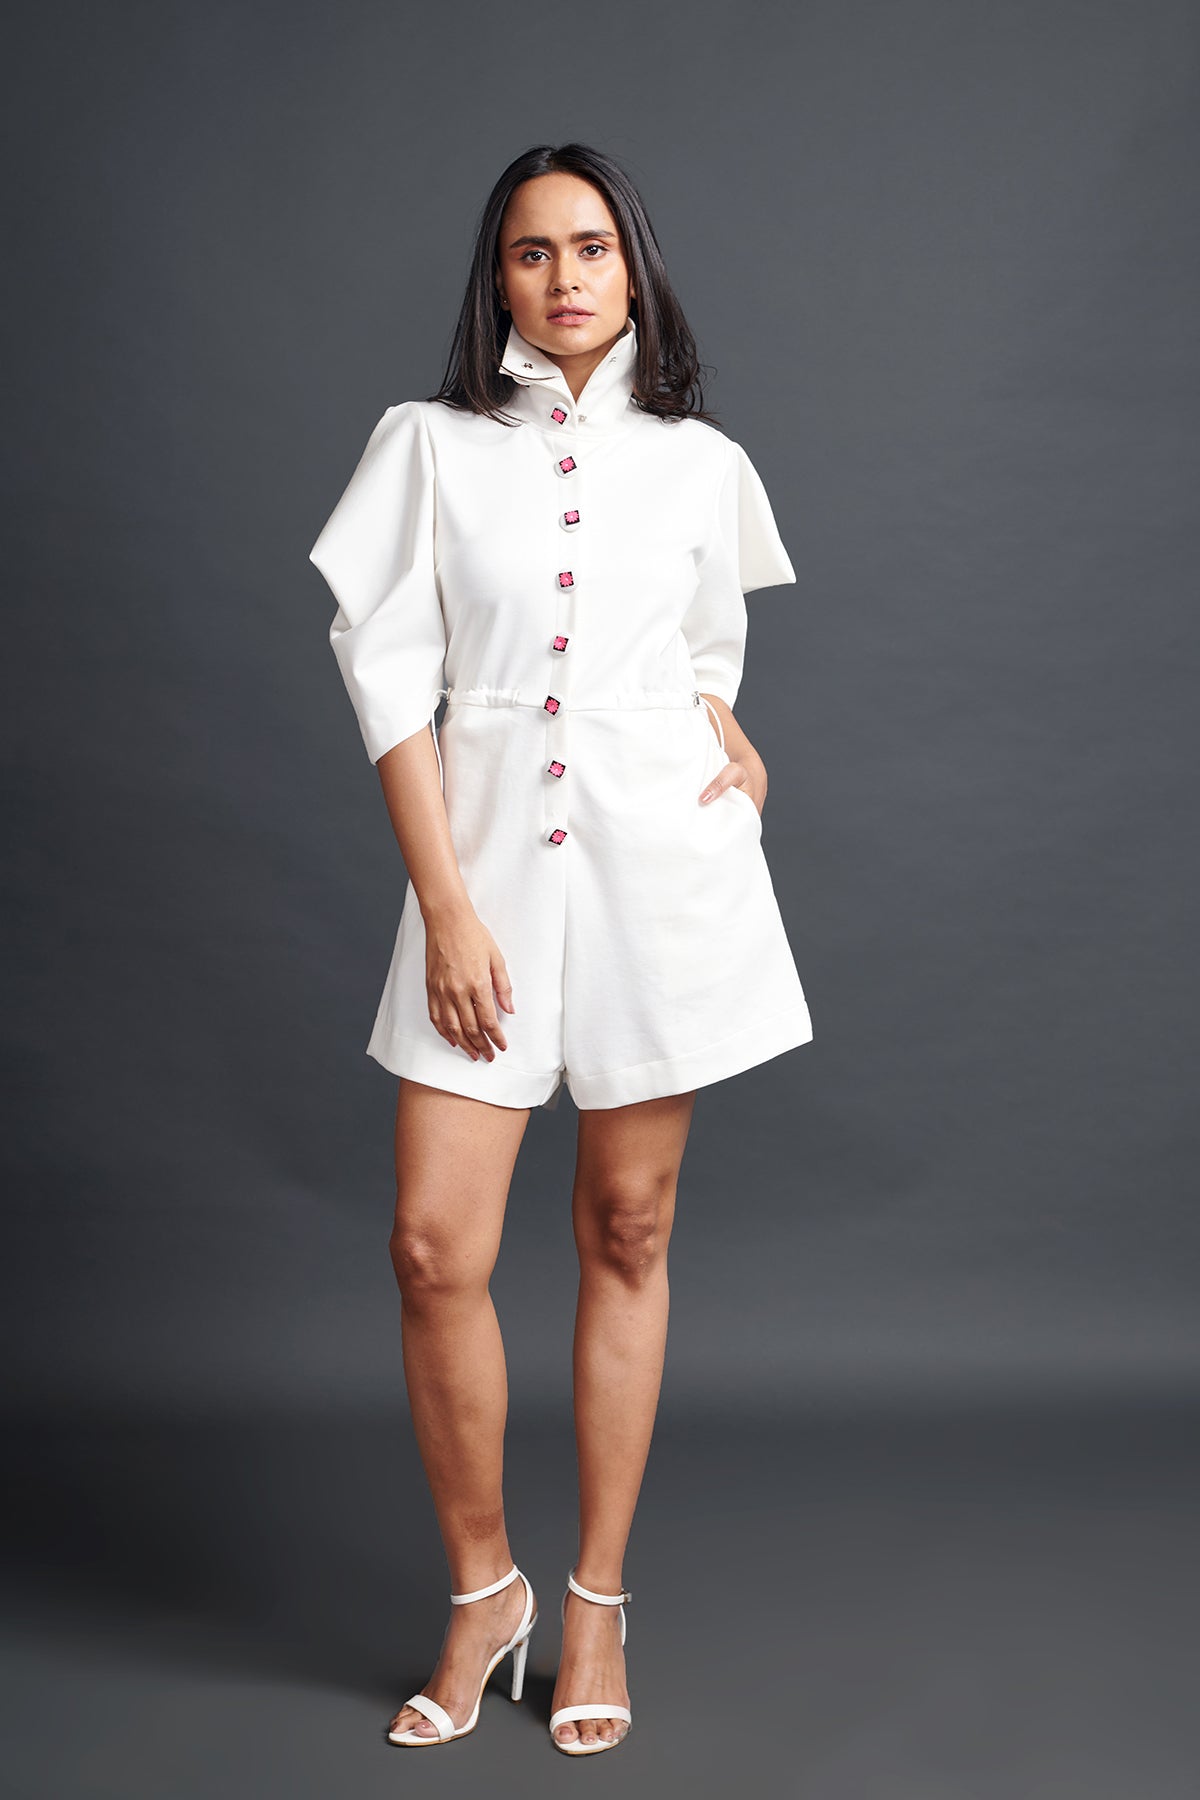 Image of WHITE HIGH NECK PLAYSUIT WITH CUT WORK NEON BUTTONS. From savoirfashions.com